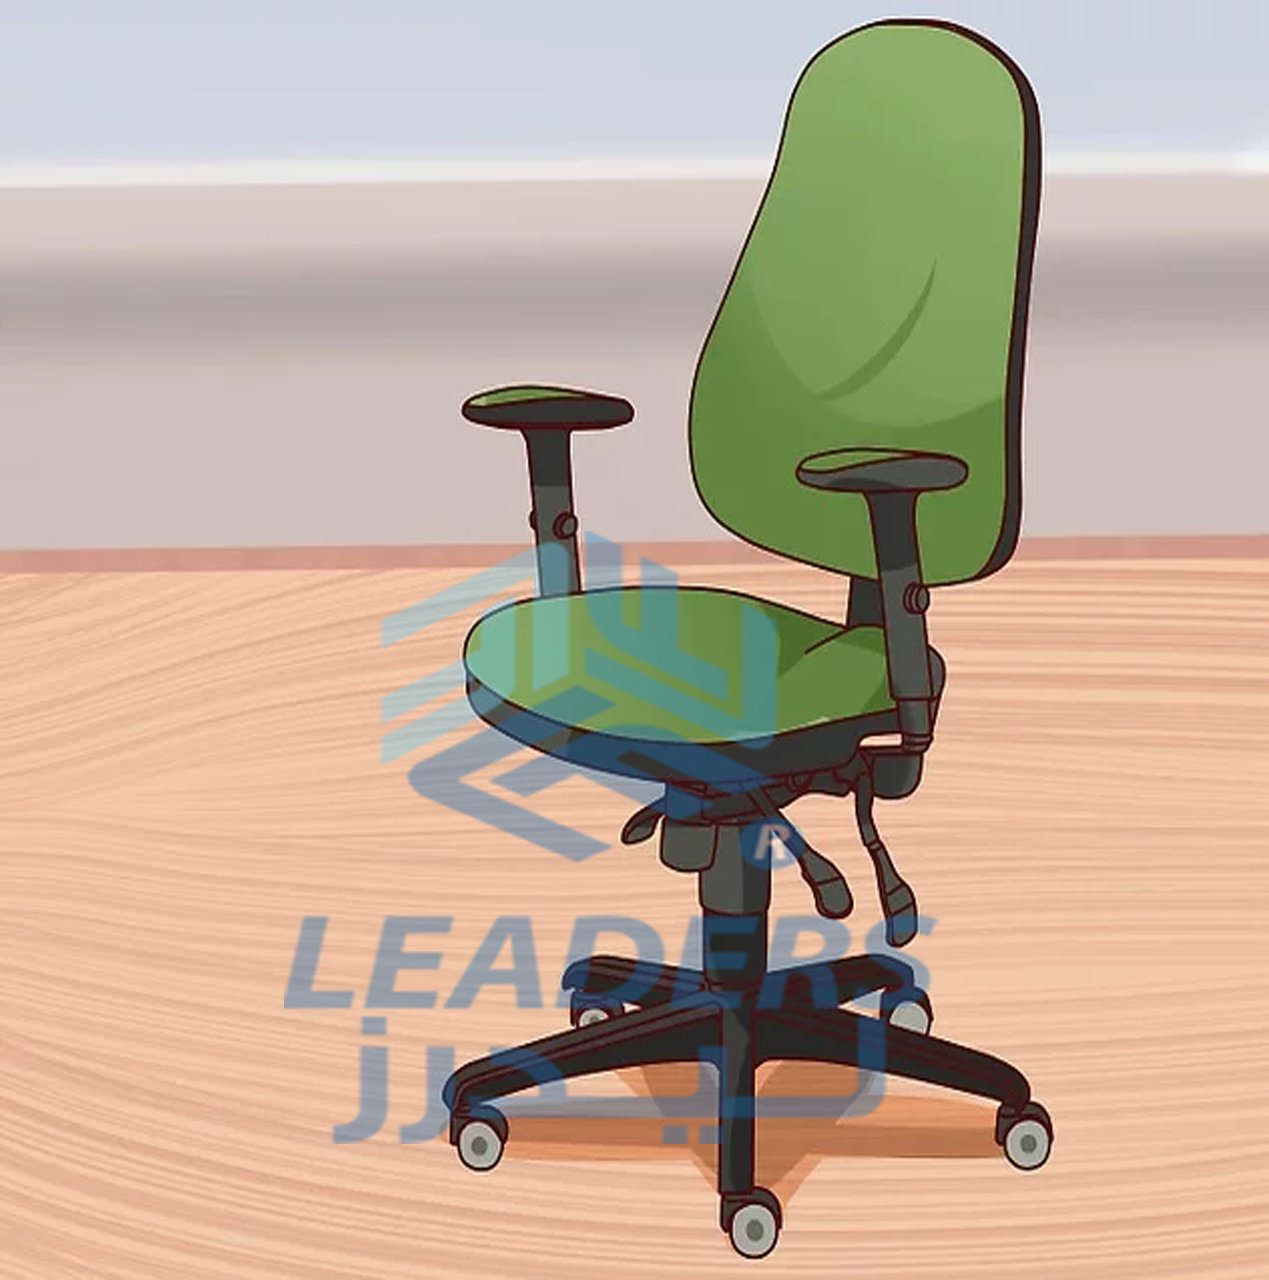 How to Choose the Right Office Chair